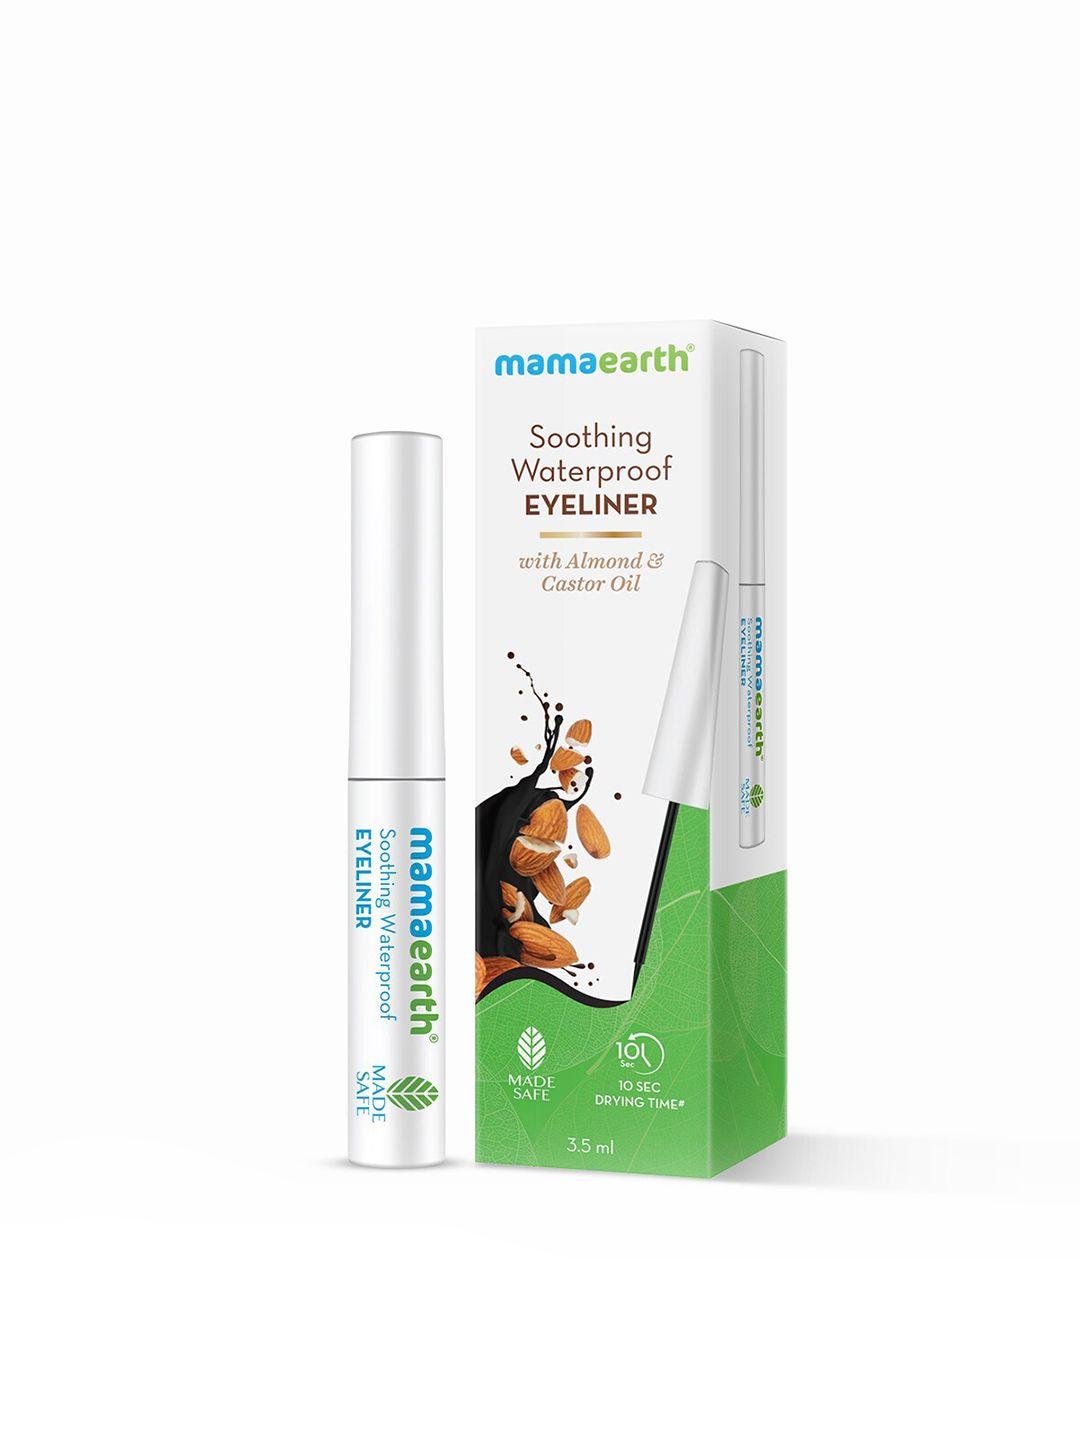 mamaearth soothing waterproof eyeliner with almond oil & castor oil for 10 hour long stay - 3.5 ml - black